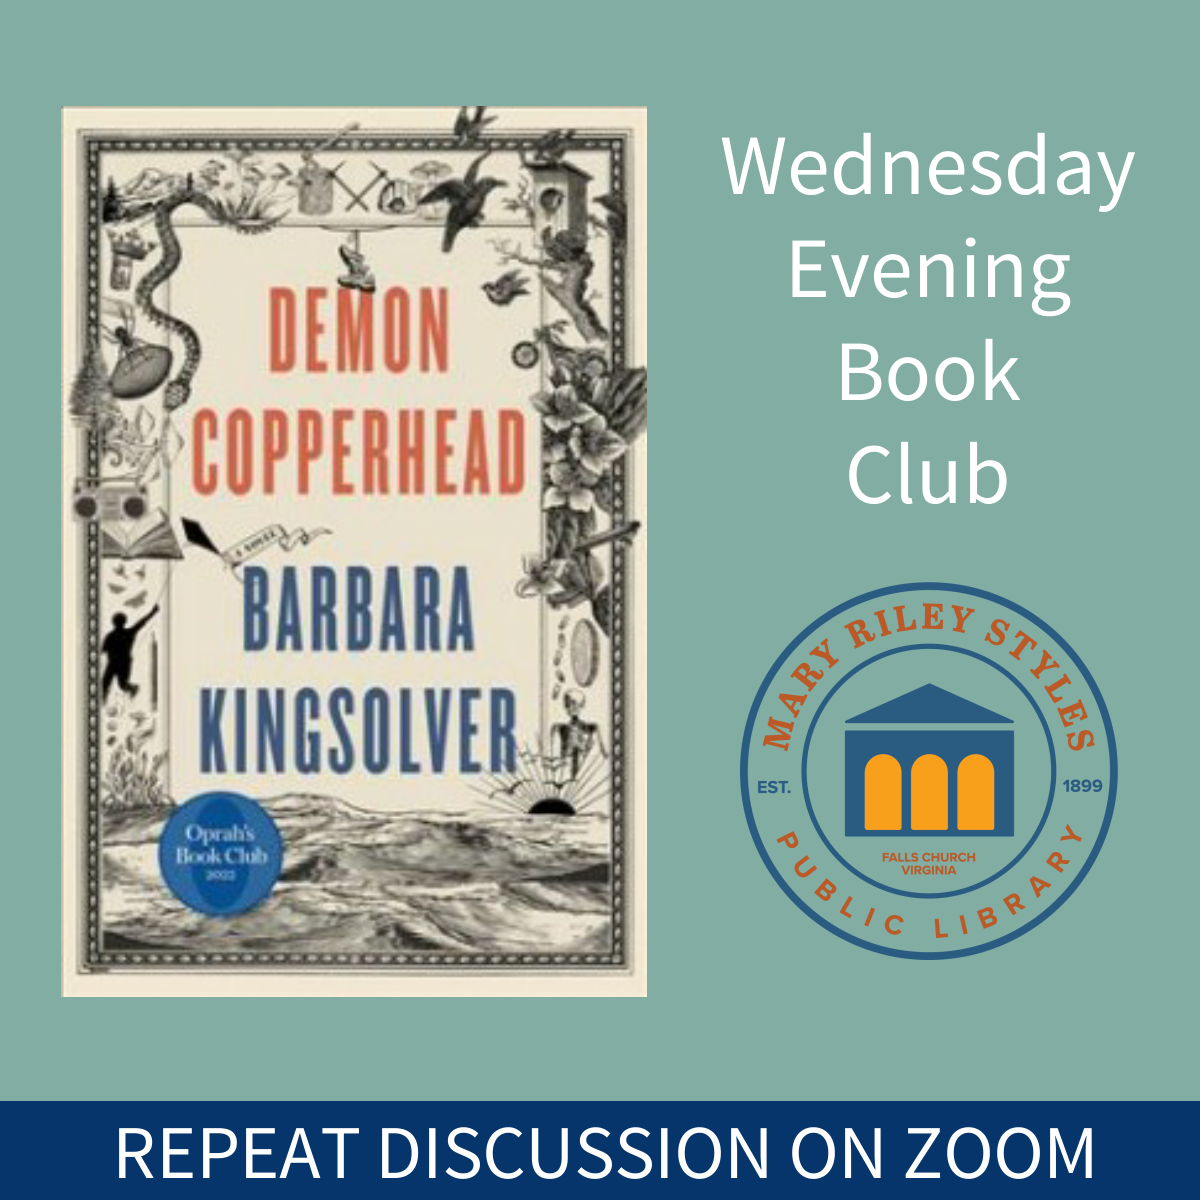 Wednesday Evening Book Club Demon Copperhead by Brabara Kingsolver Repeat Discussion on Zoom